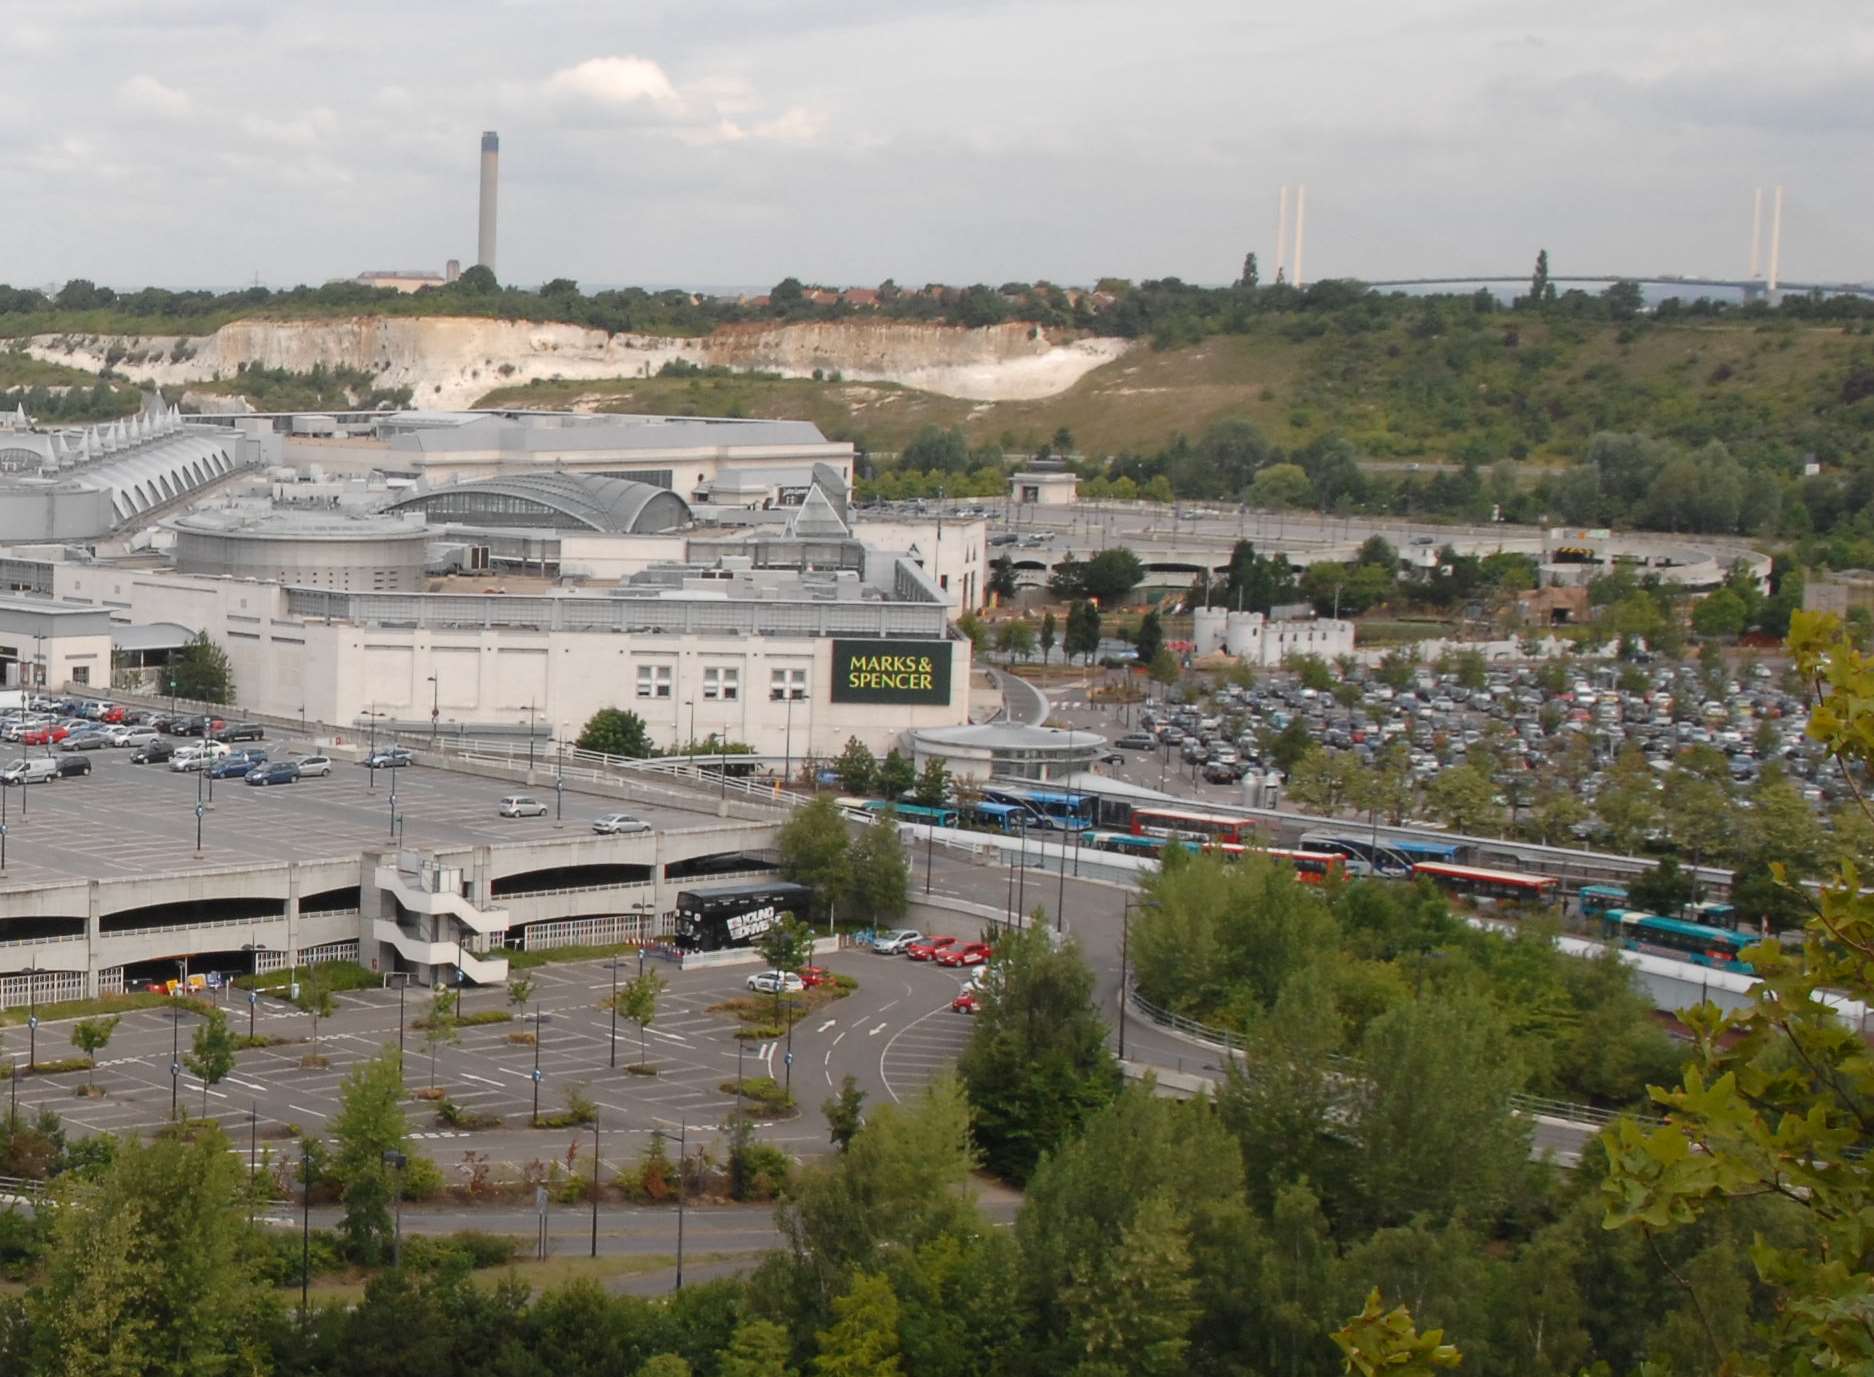 Bluewater shopping centre sits in a former chalk quarry